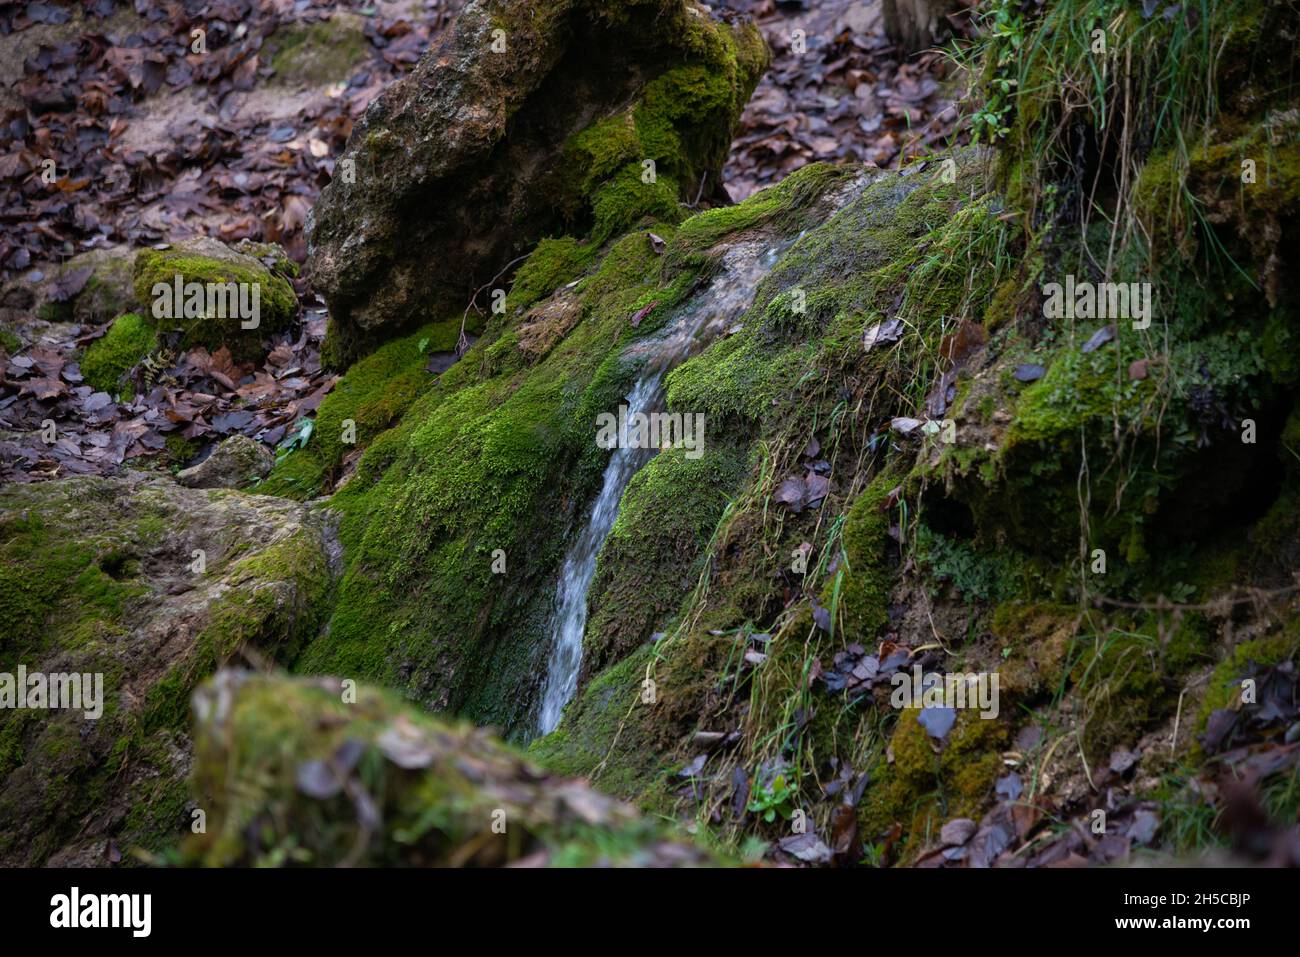 sandy rock along which flows a clear forest spring water forming a waterfall. Stones with green moss. Stock Photo